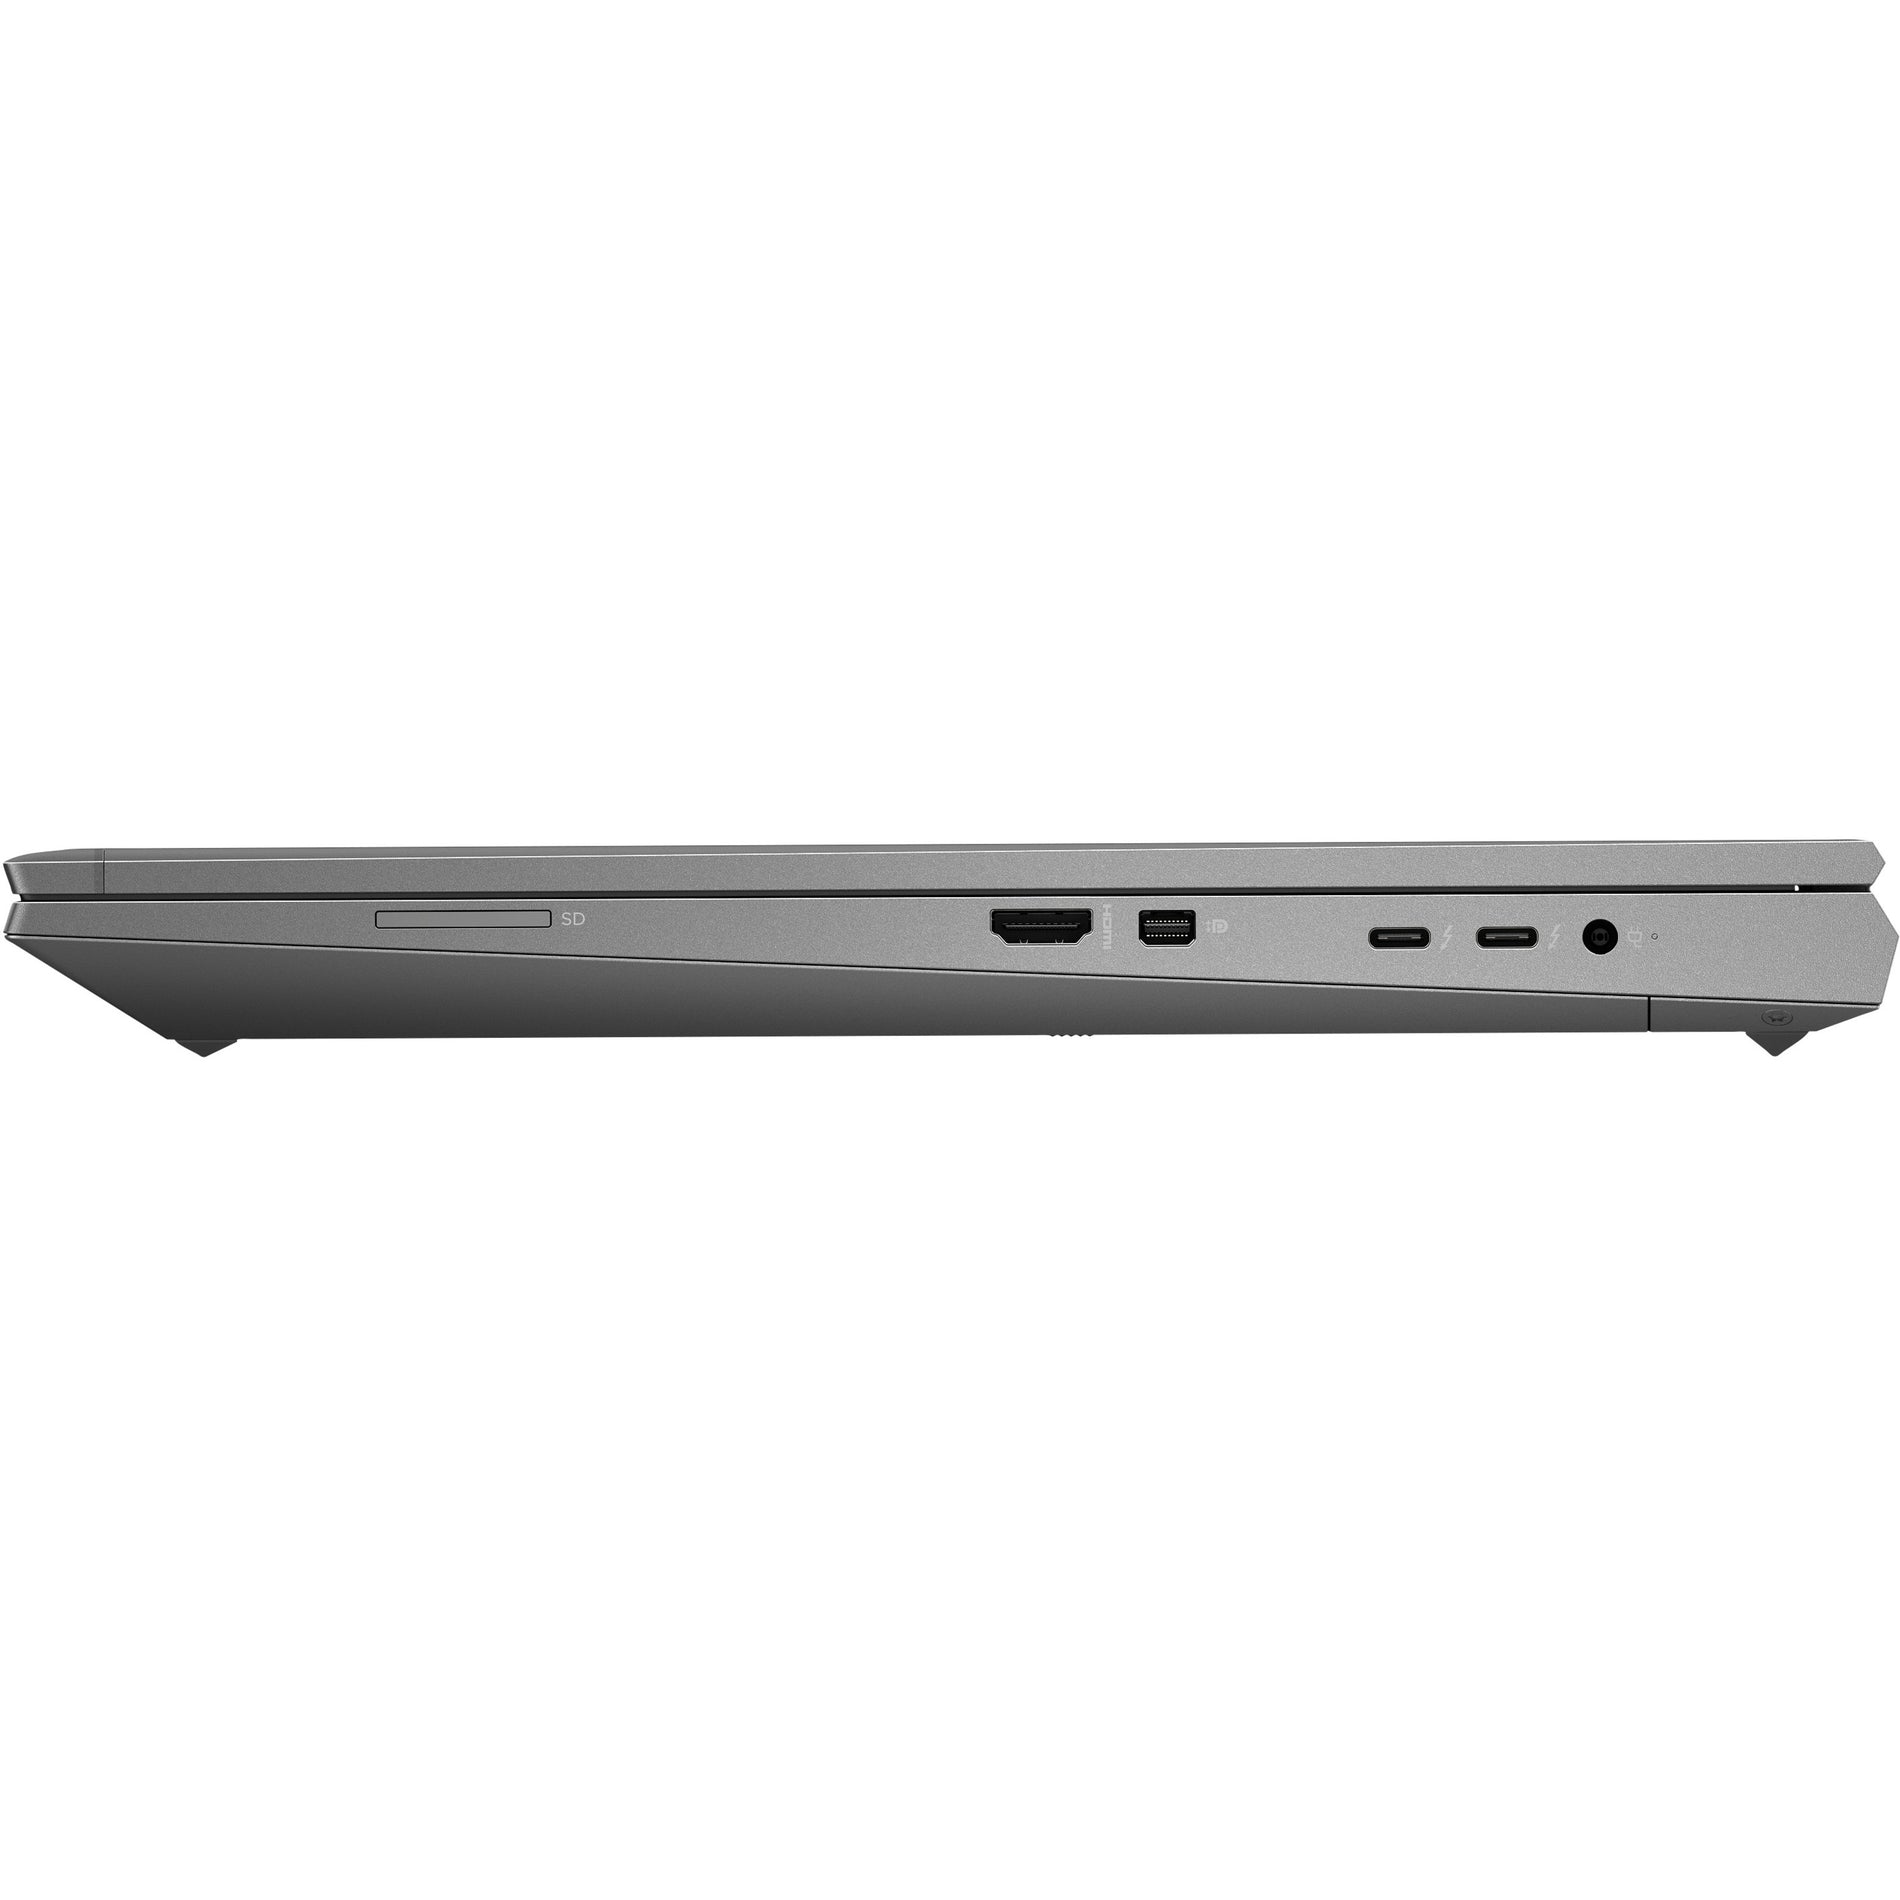 HP ZBook Fury 17 G8 17.3" Mobile Workstation - Full HD - 1920 x 1080 - Intel Core i9 11th Gen i9-11950H Octa-core (8 Core) 2.60 GHz - 32 GB Total RAM - 1 TB SSD (63H29UT#ABA) Left image